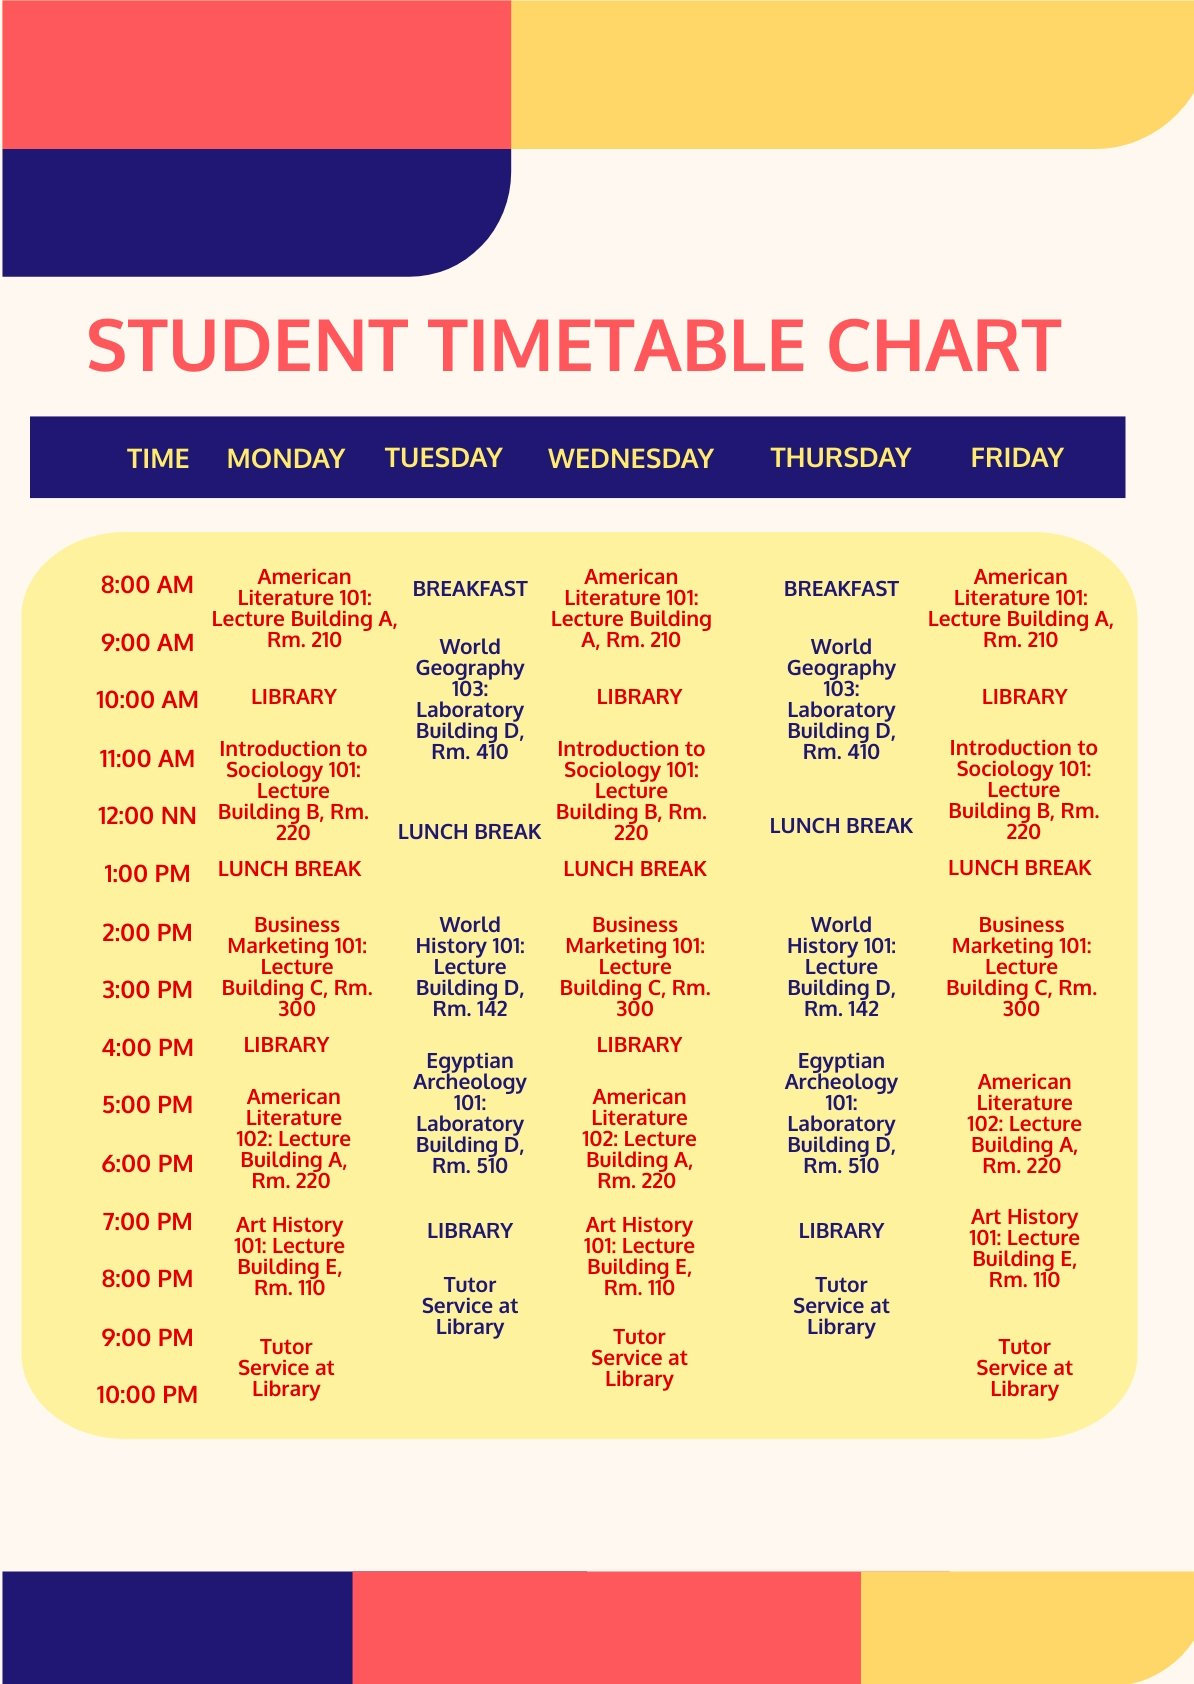 Student Timetable Chart Template